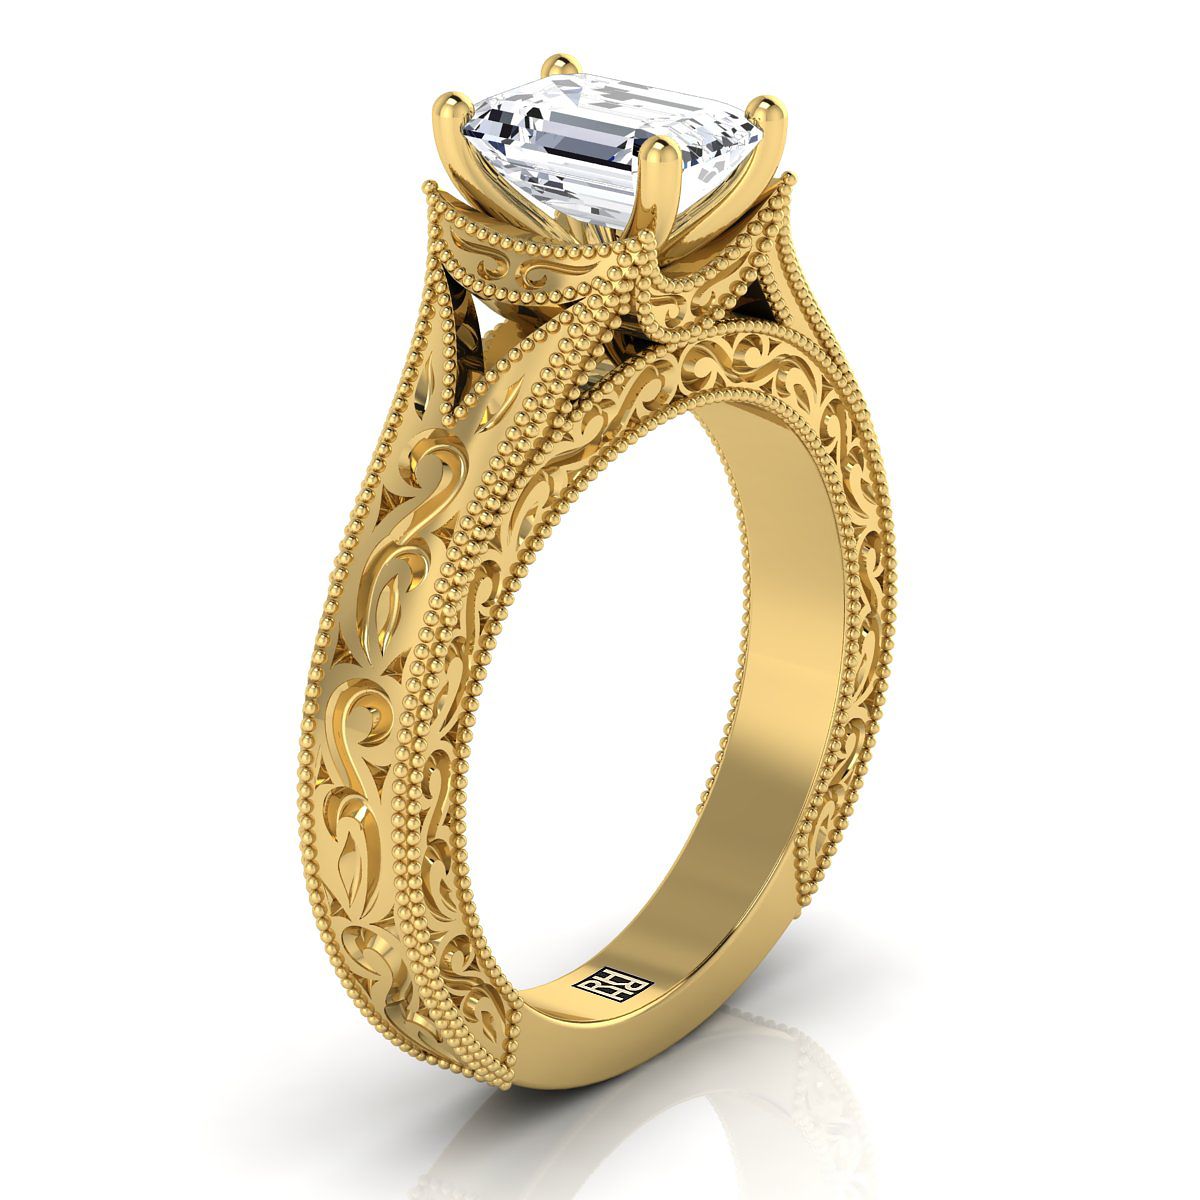 14K Yellow Gold Emerald Cut  Hand Engraved and Milgrain Vintage Solitaire Engagement Ring